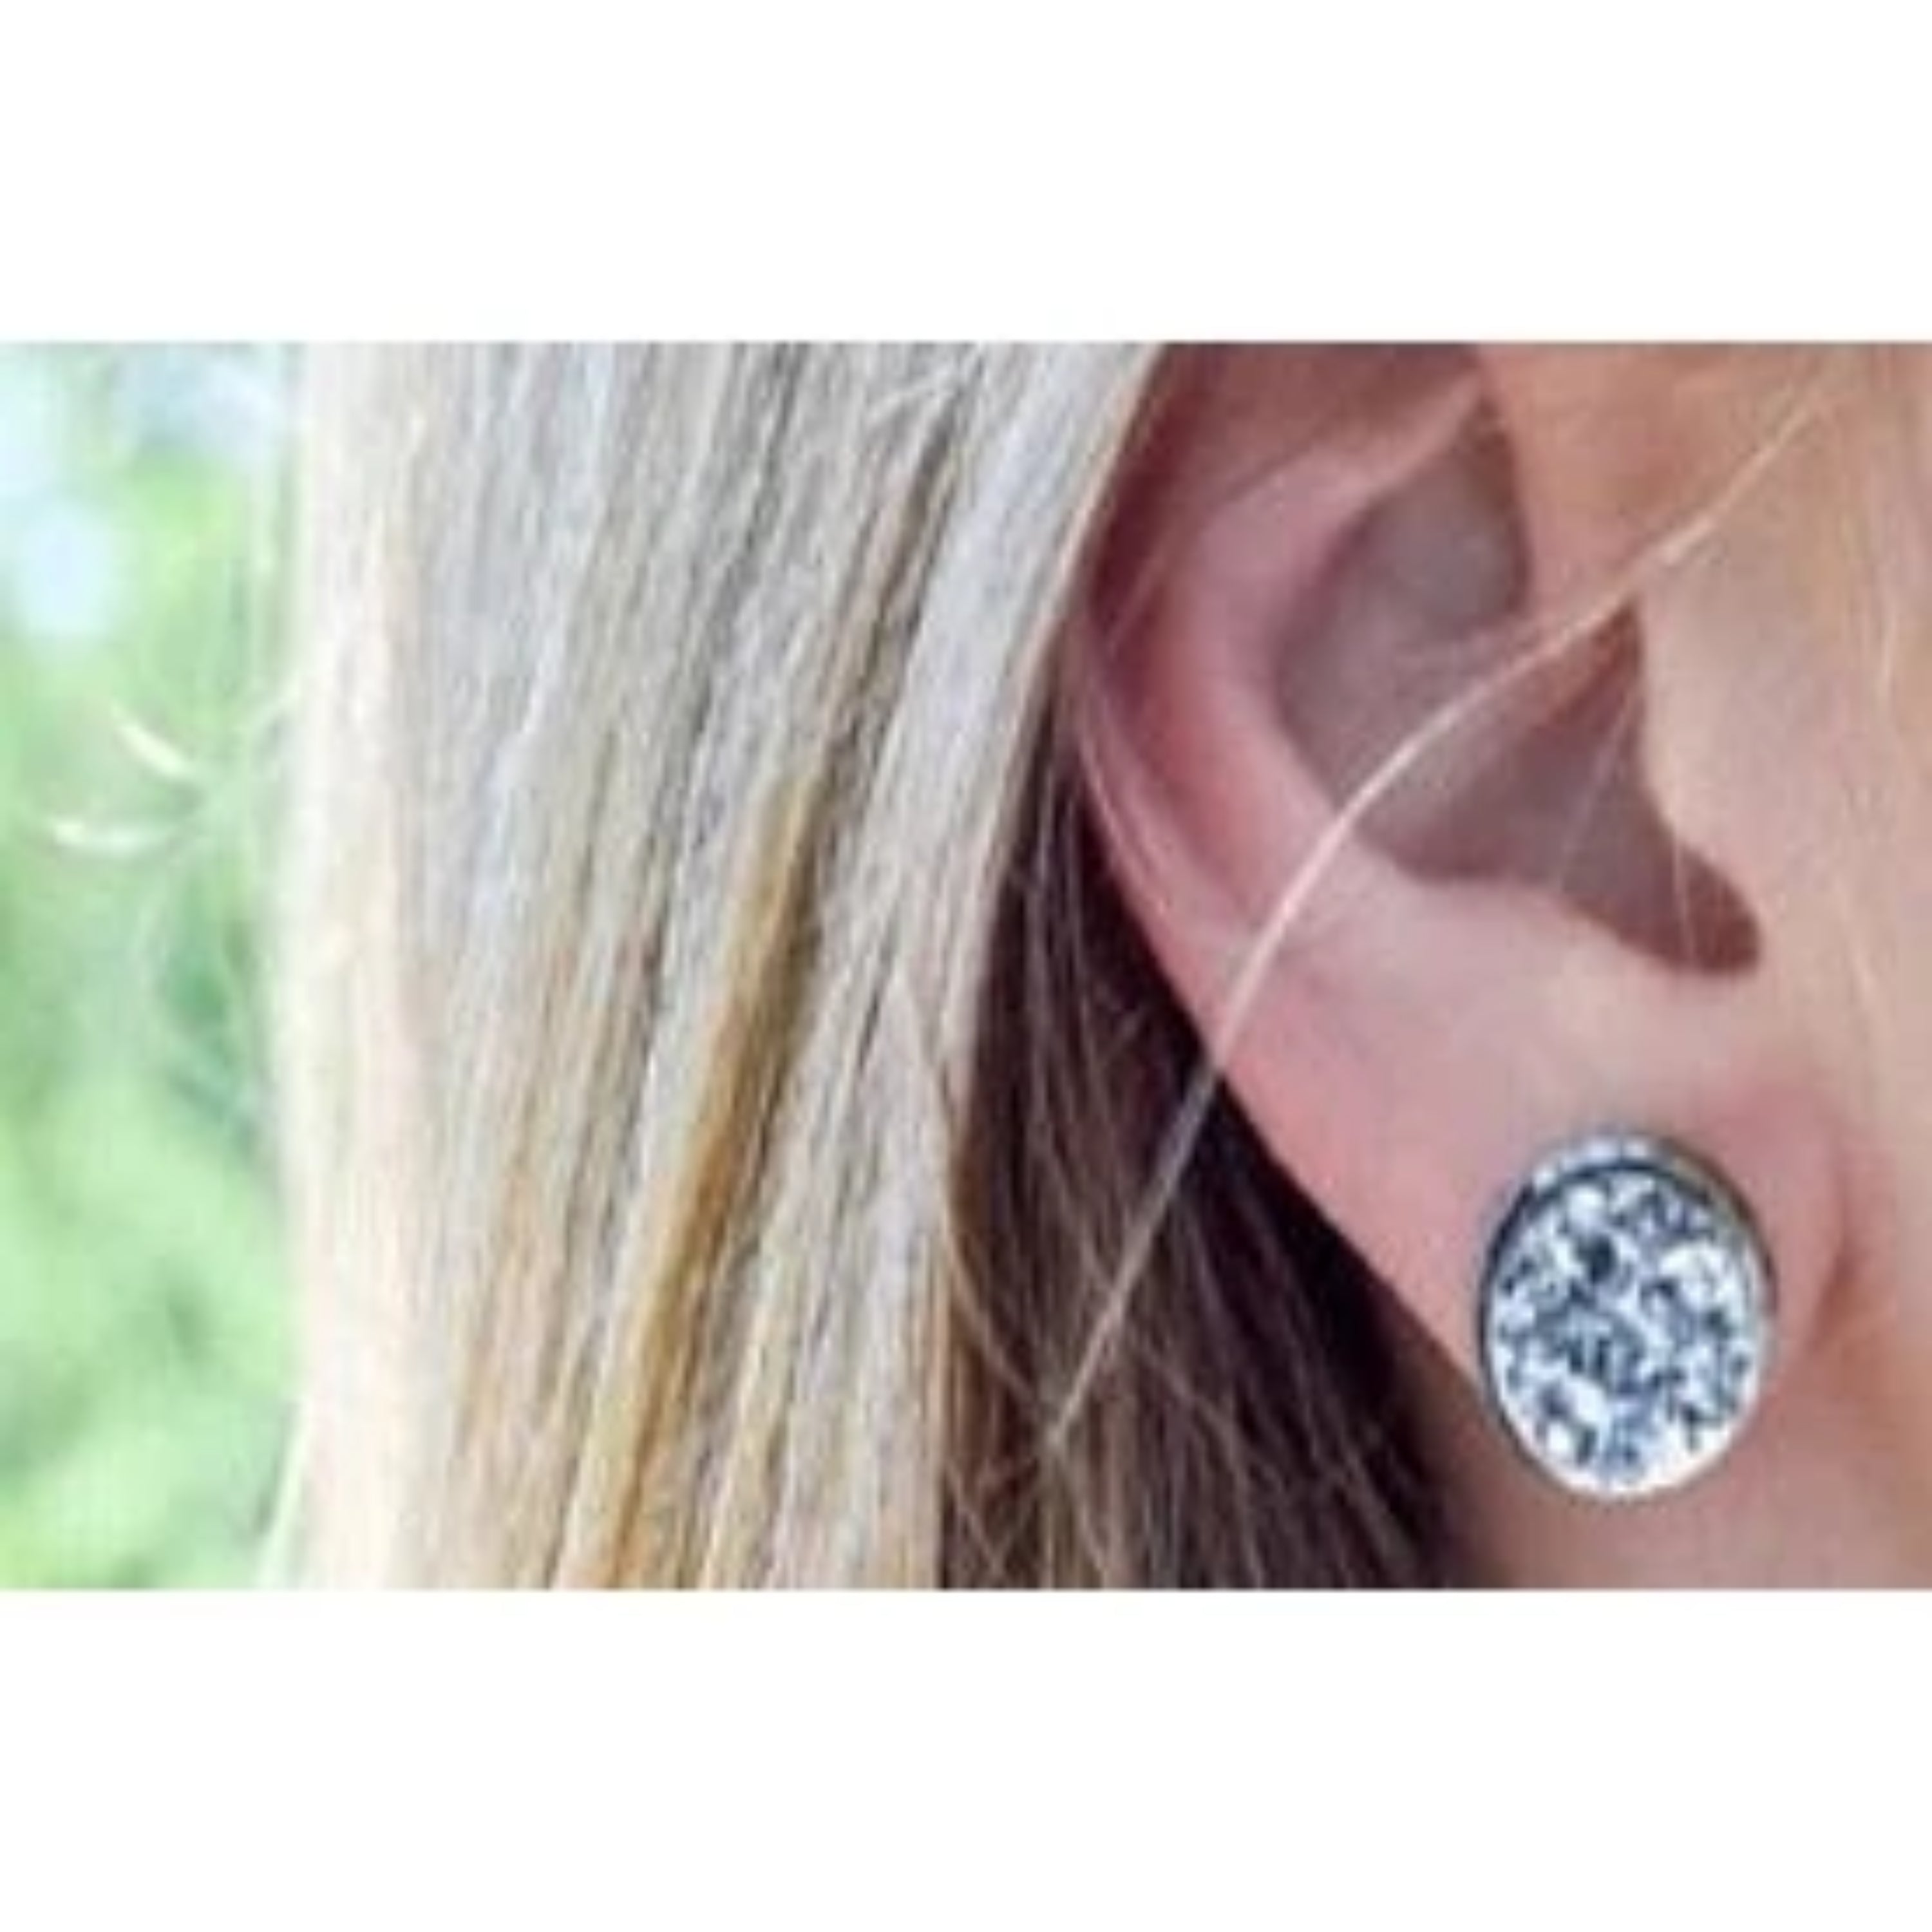 Strawberry & Silver Post Druzy Earring - Southern Ivy Boutique